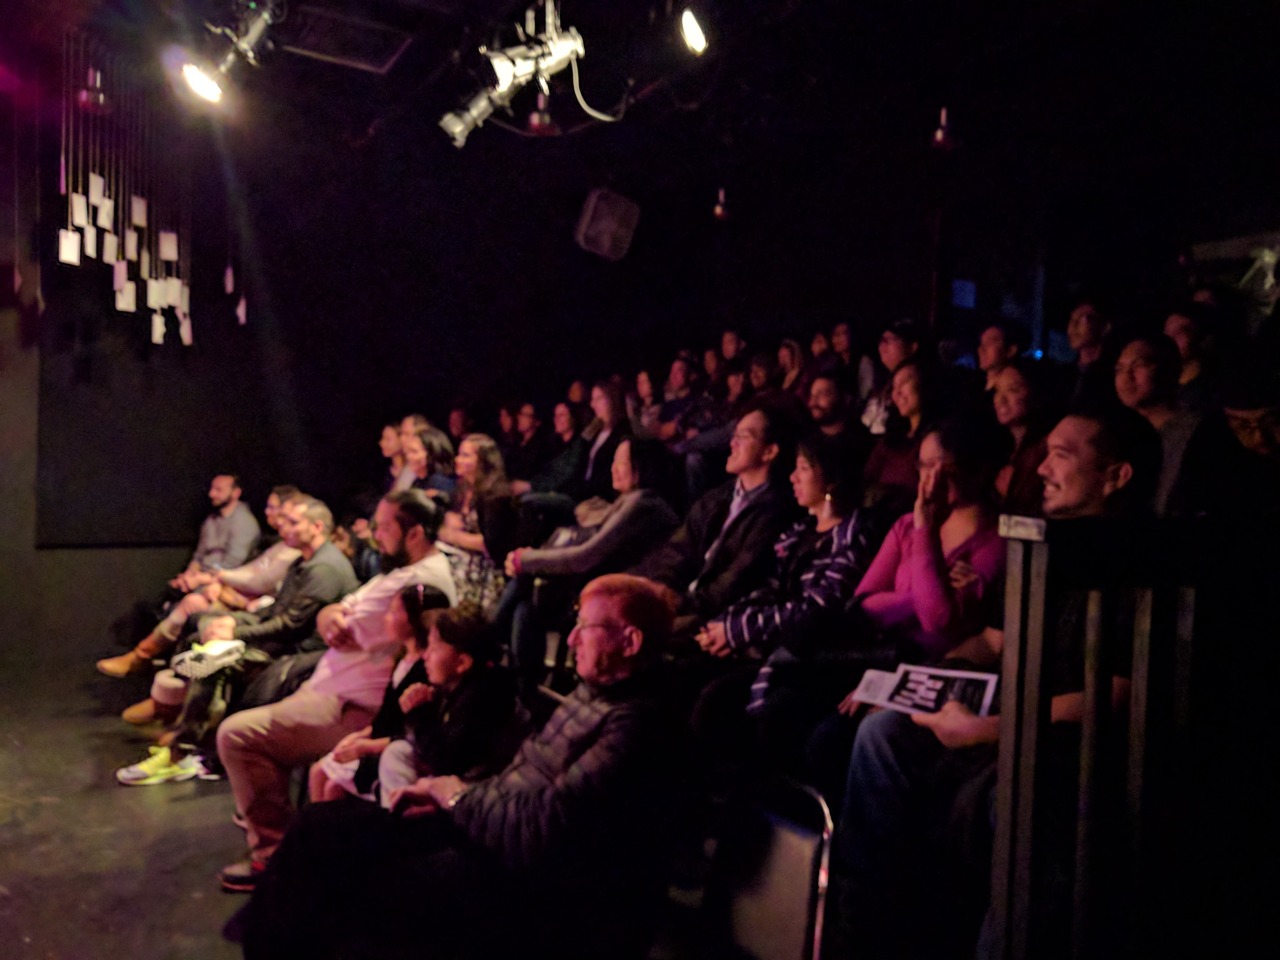 Pictured: A photo of an audience watching the Love Edition Festival produced by Bindlestiff Studio, SF, CA.